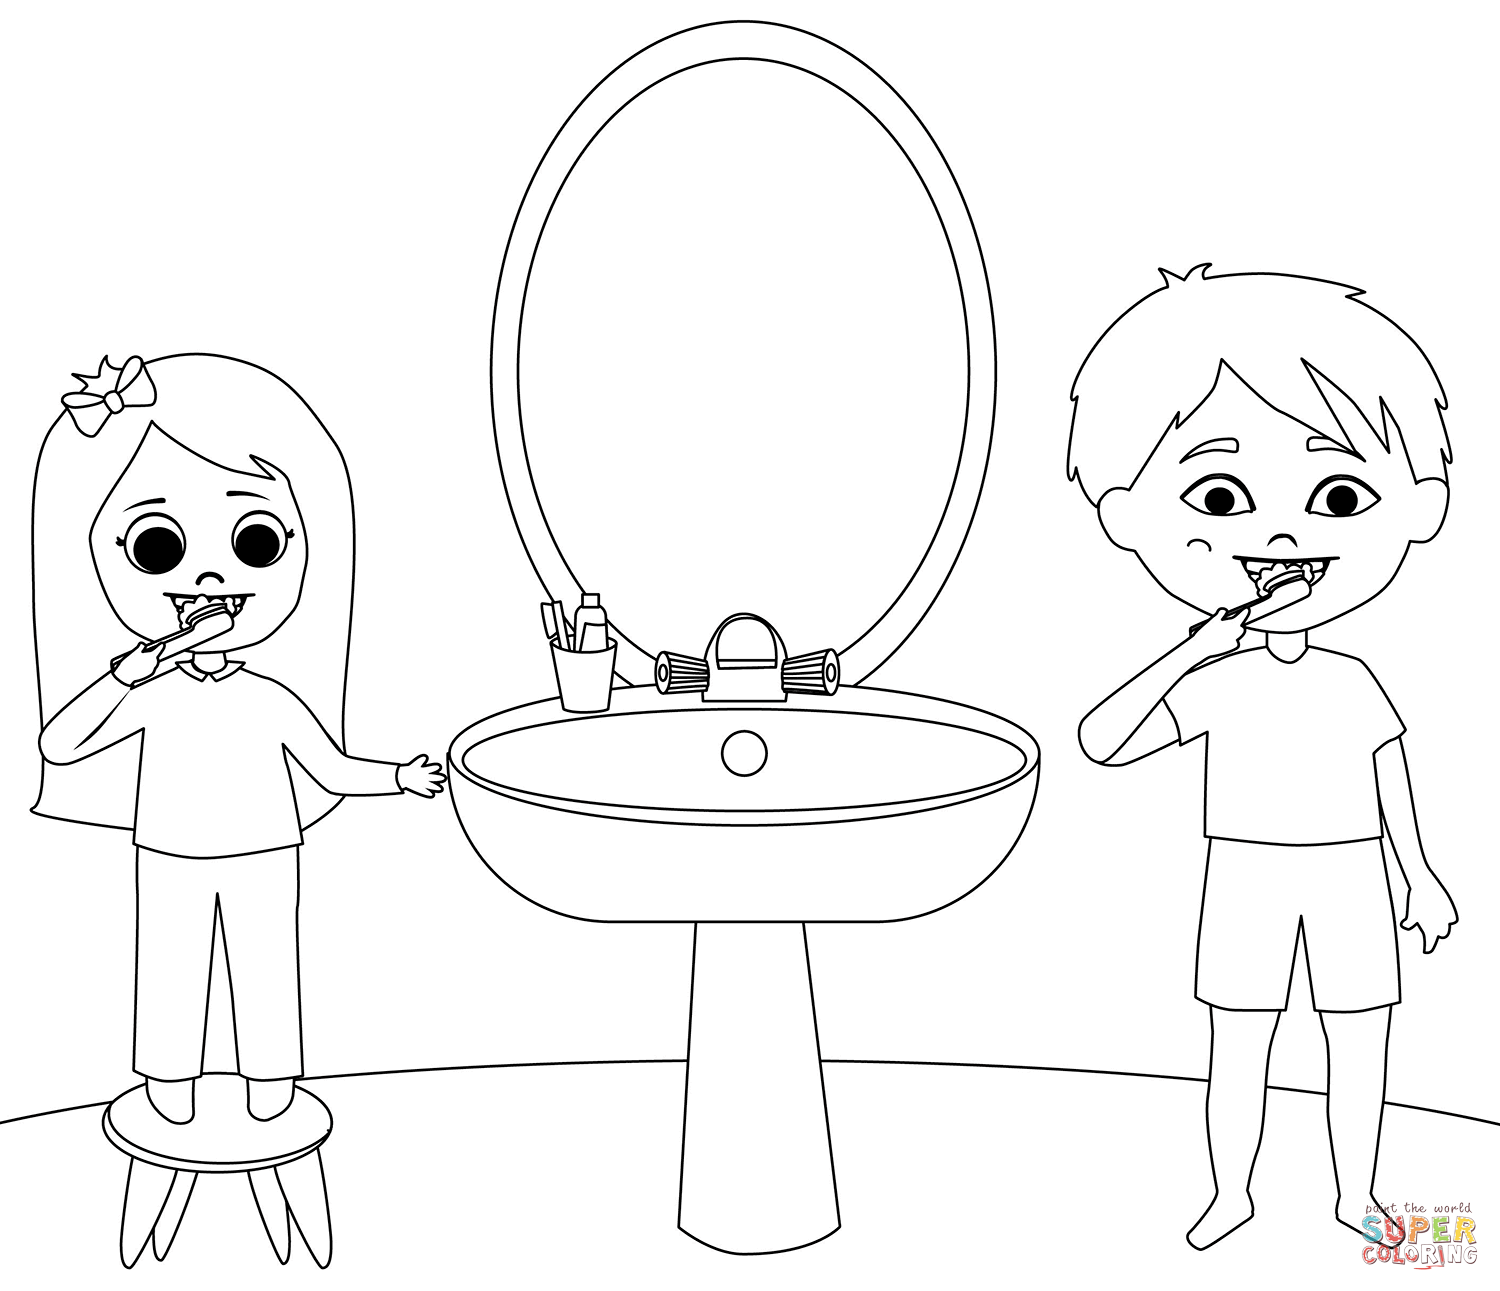 Children brushing teeth coloring page free printable coloring pages